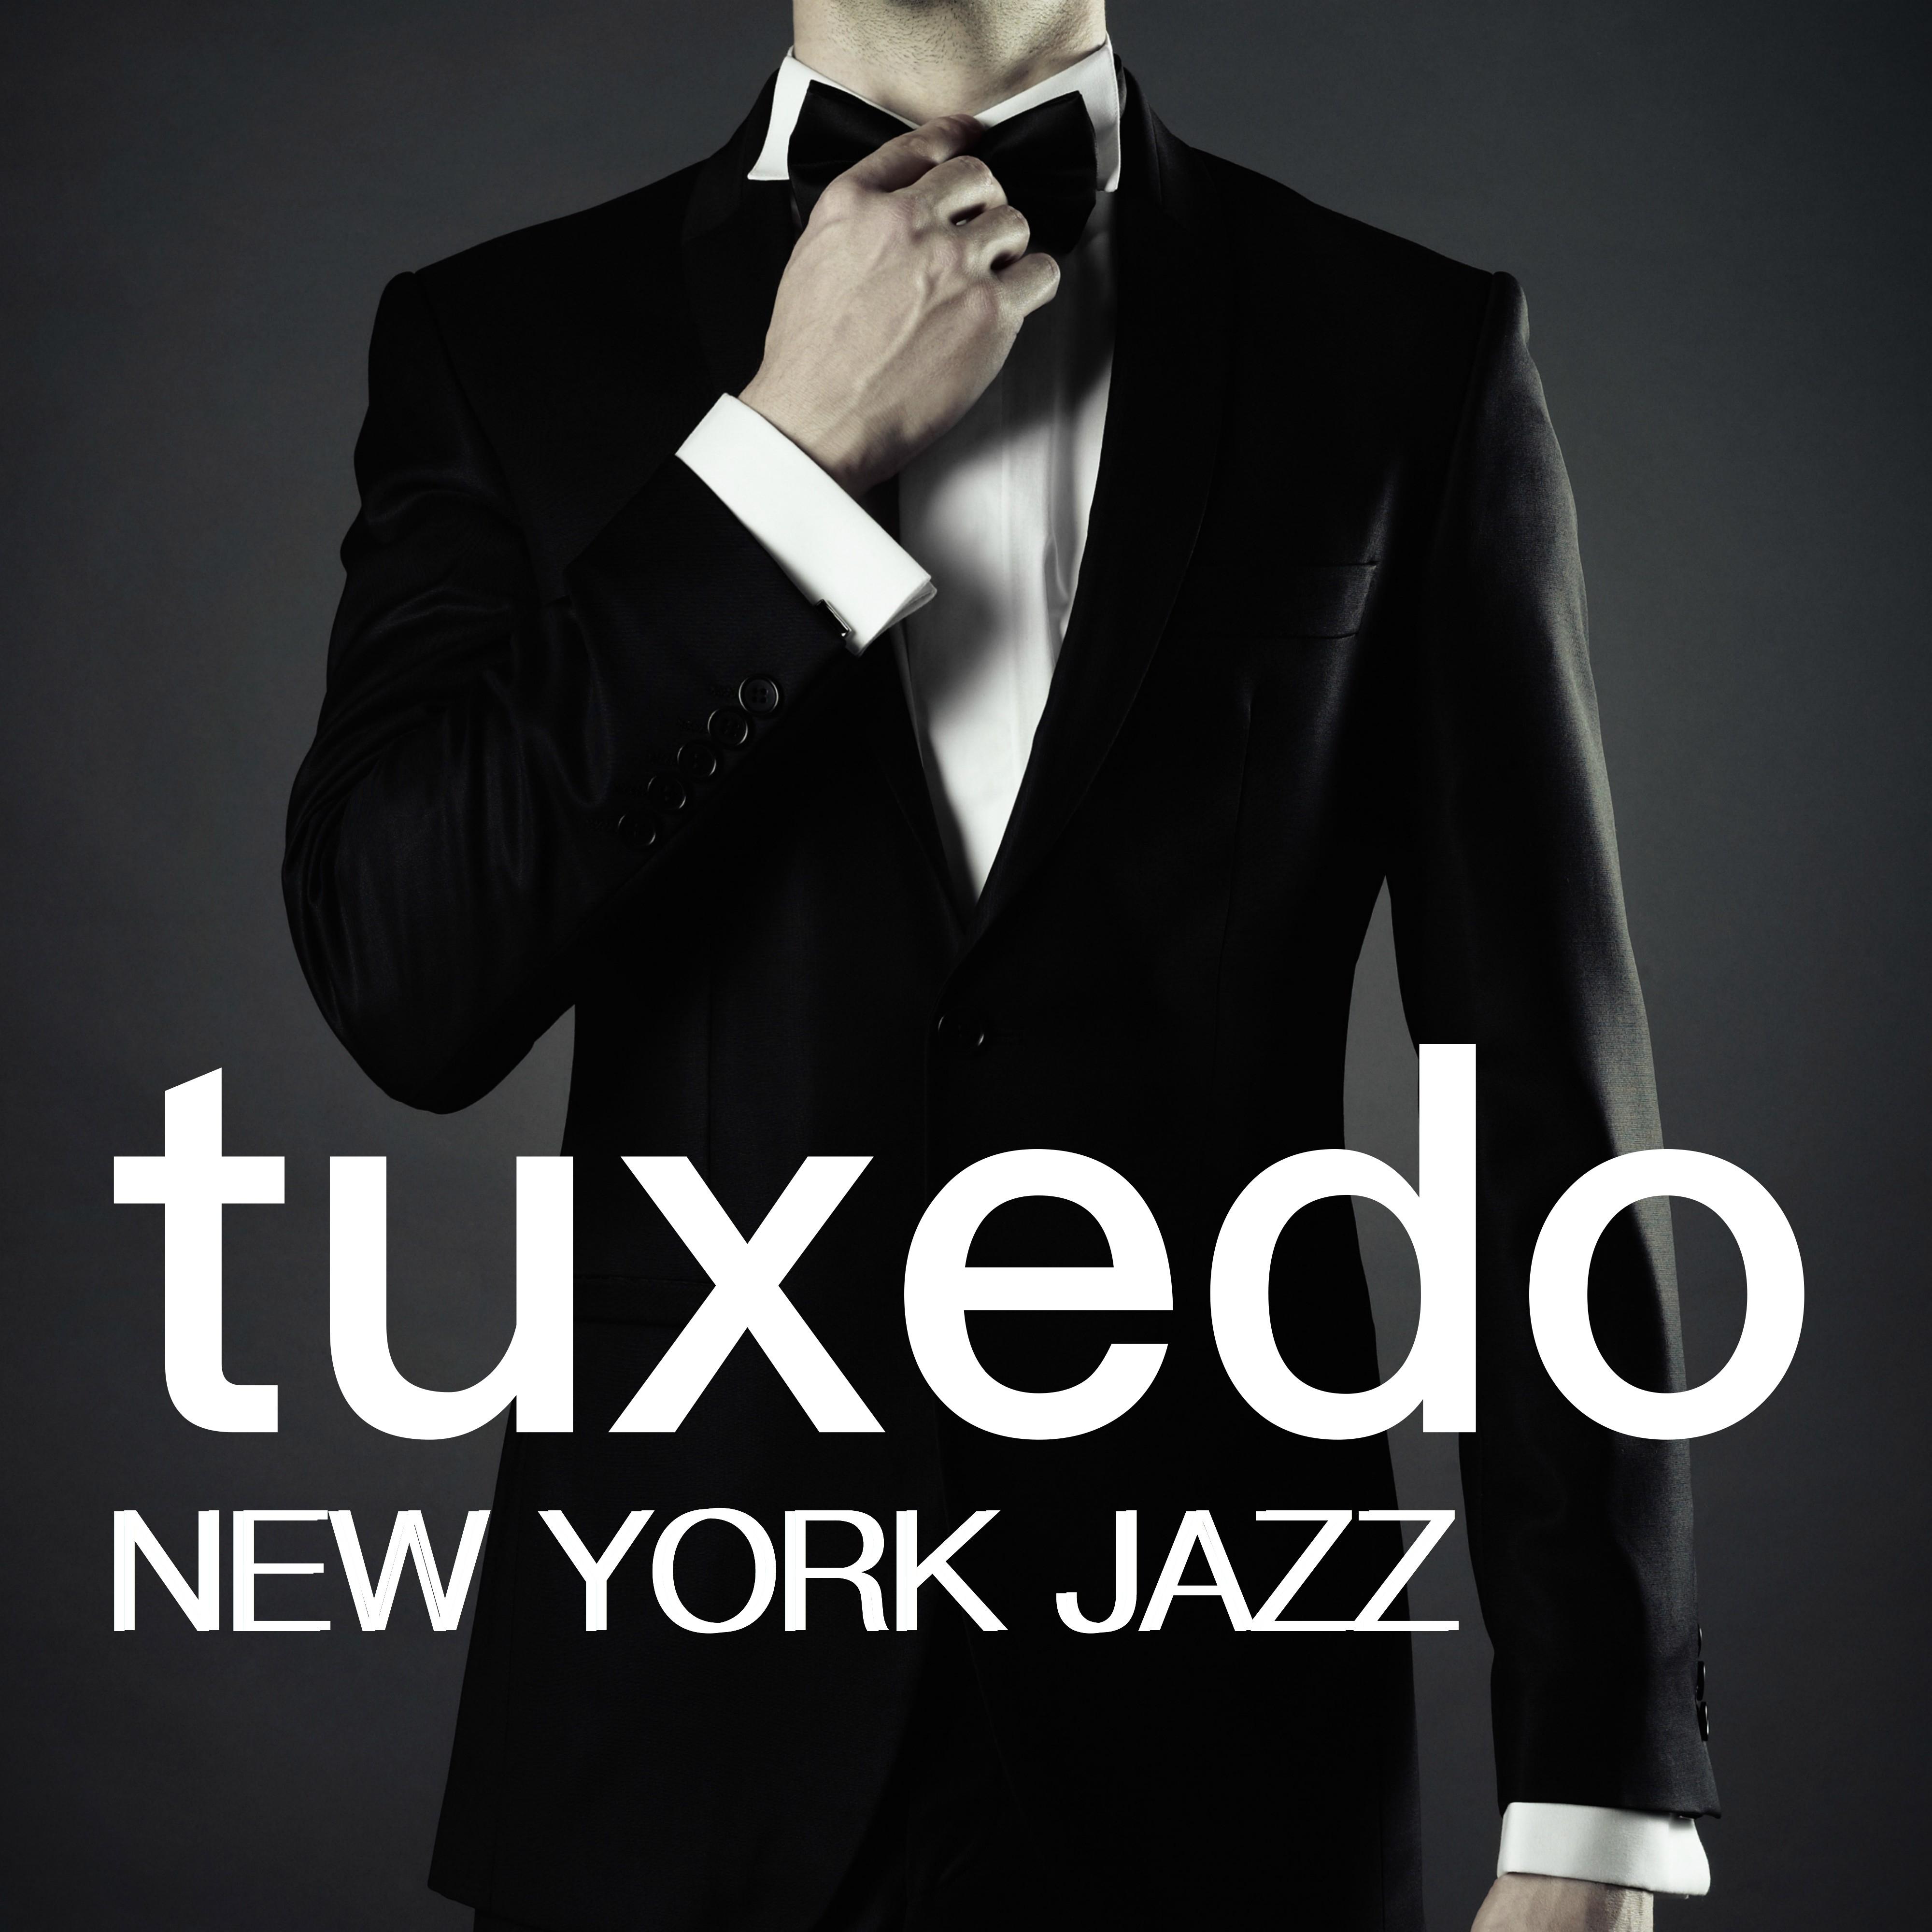 Tuxedo - New York Jazz: Romantic Jazz & Blues Music for Special Nights in Love